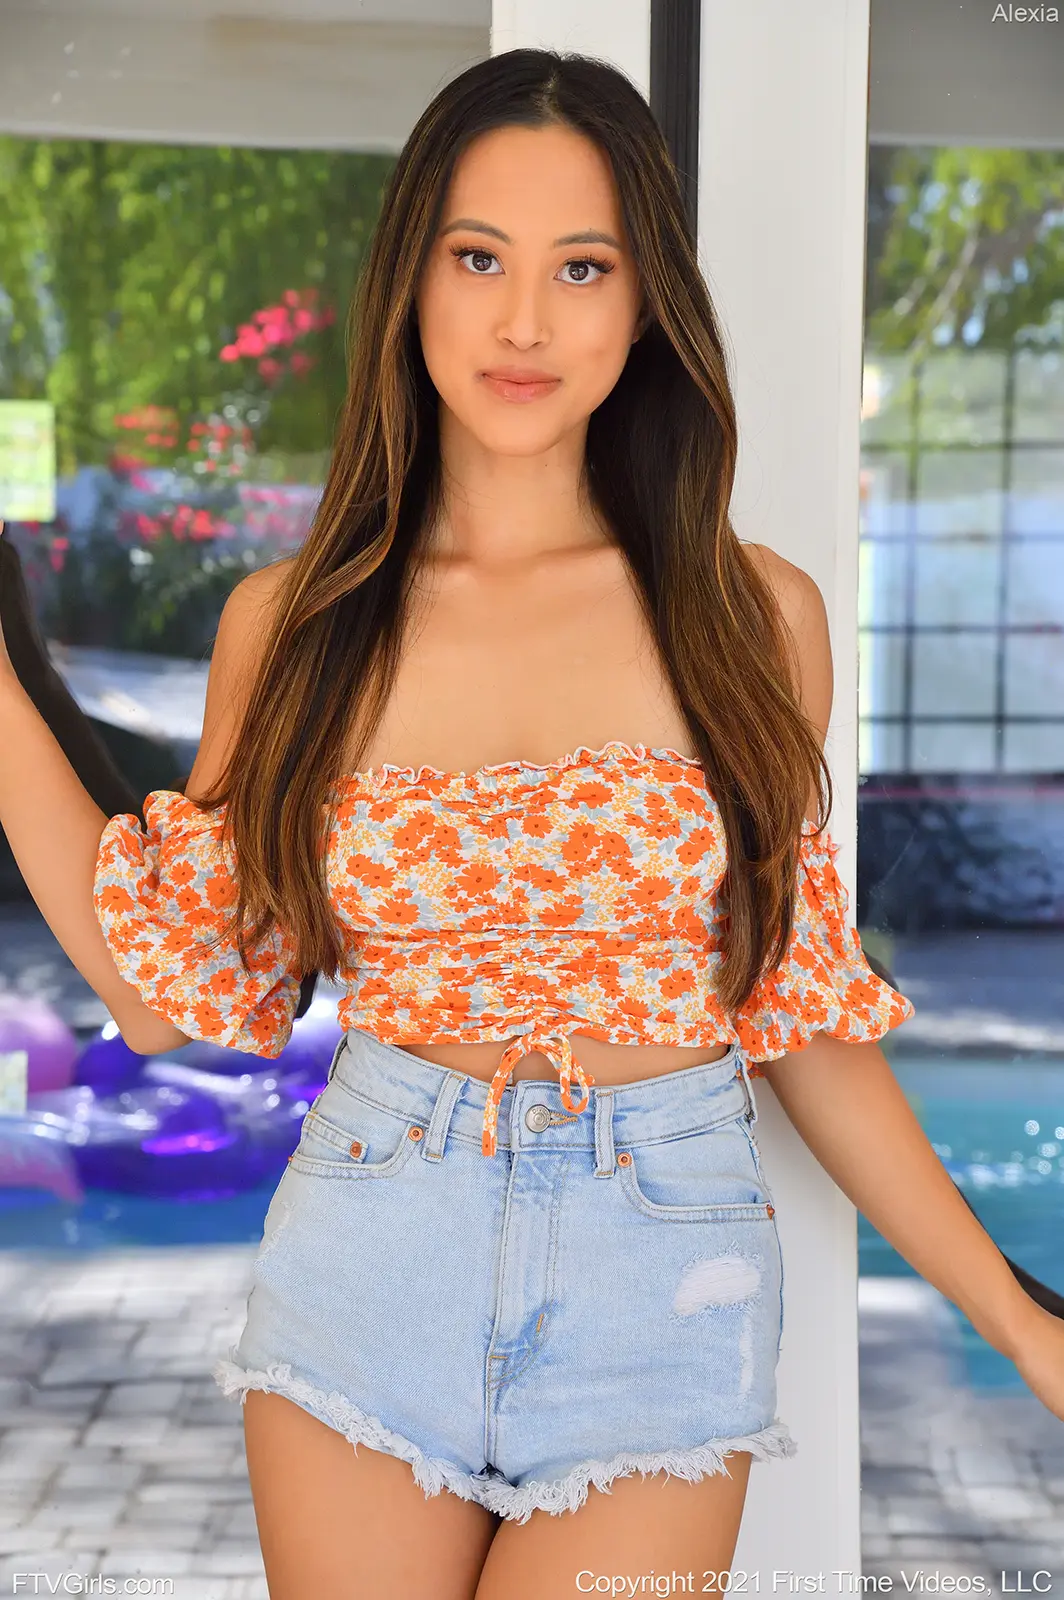 teen pornstar Alexia FTV is non nude wearing a orange colored floral sleeveless dress and mini shorts while standing near a swimming pool in Casual Striptease